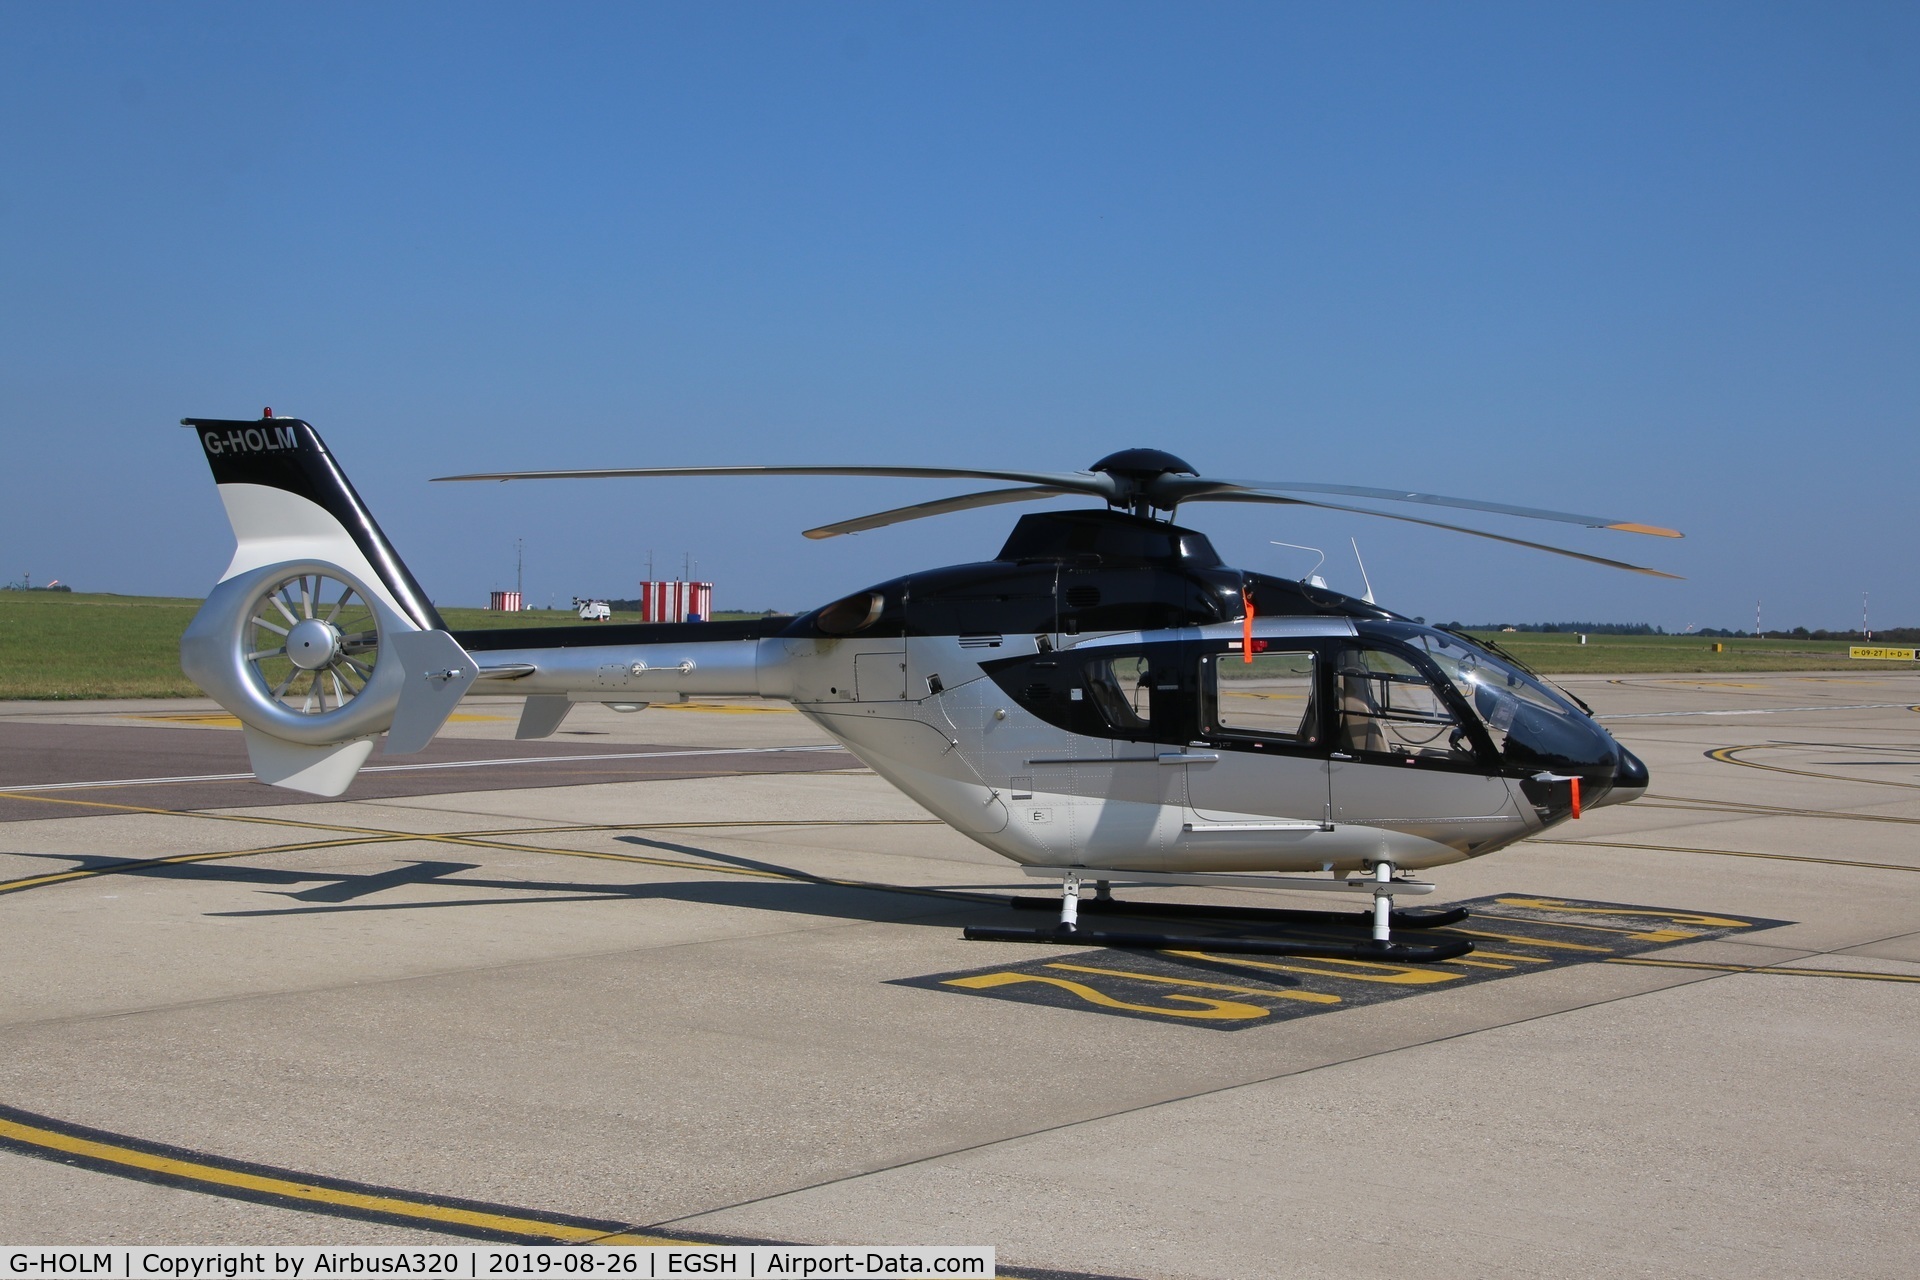 G-HOLM, 2007 Eurocopter EC-135T-2+ C/N 0574, Parked on the Saxon ramp